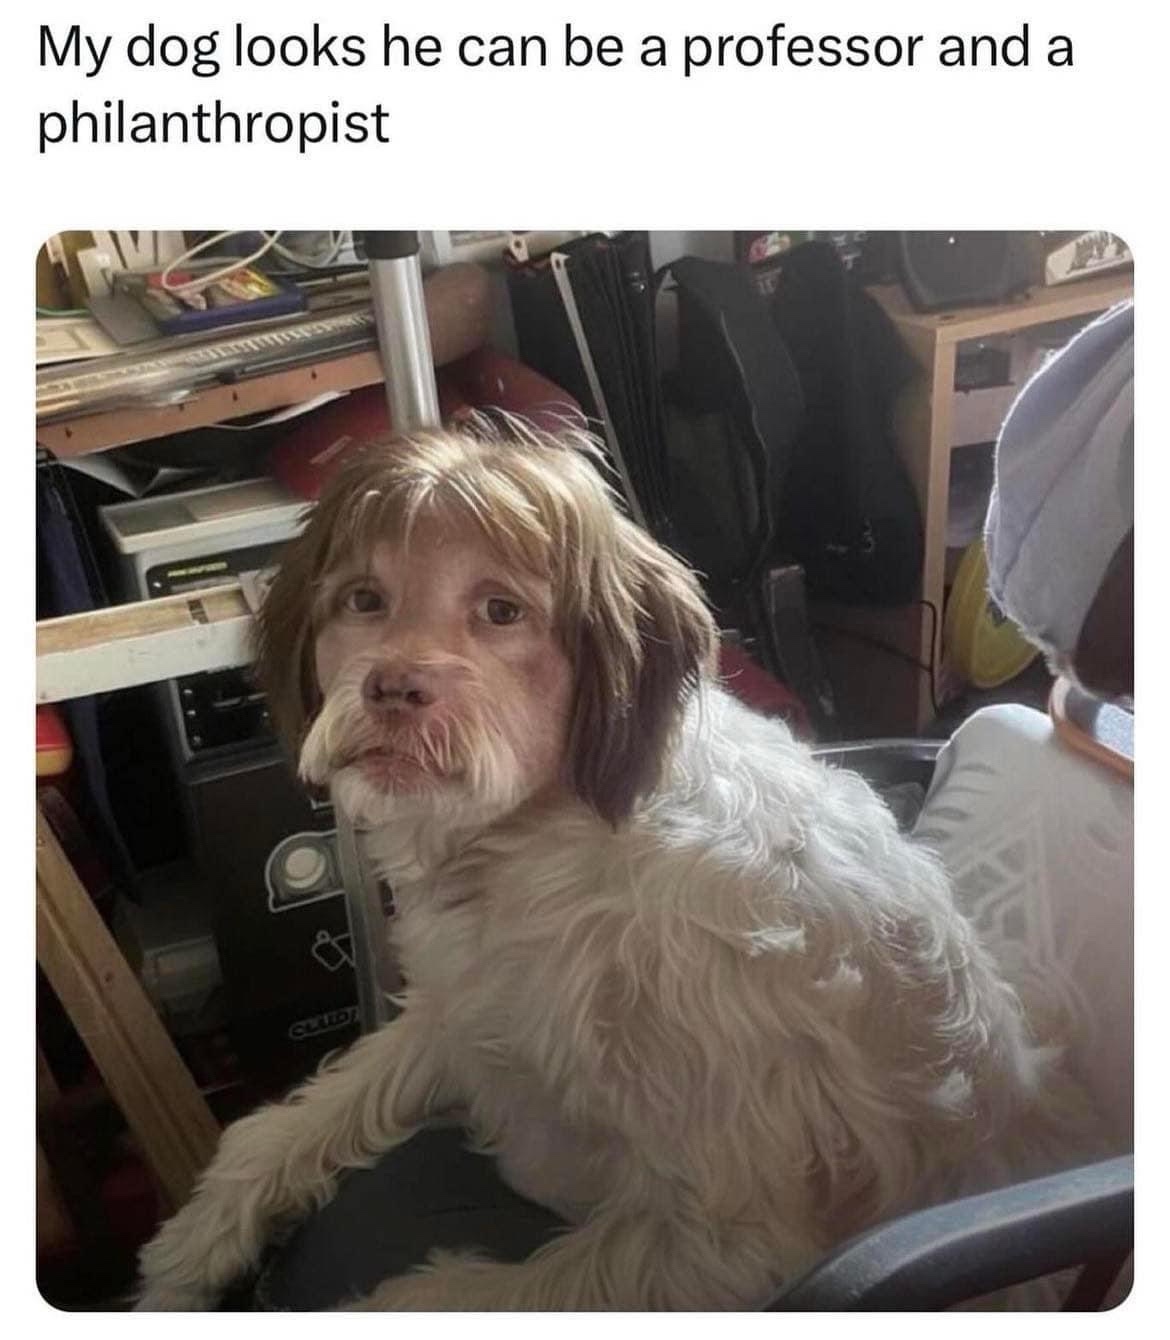 funny memes - My dog looks he can be a professor and a philanthropist Clled